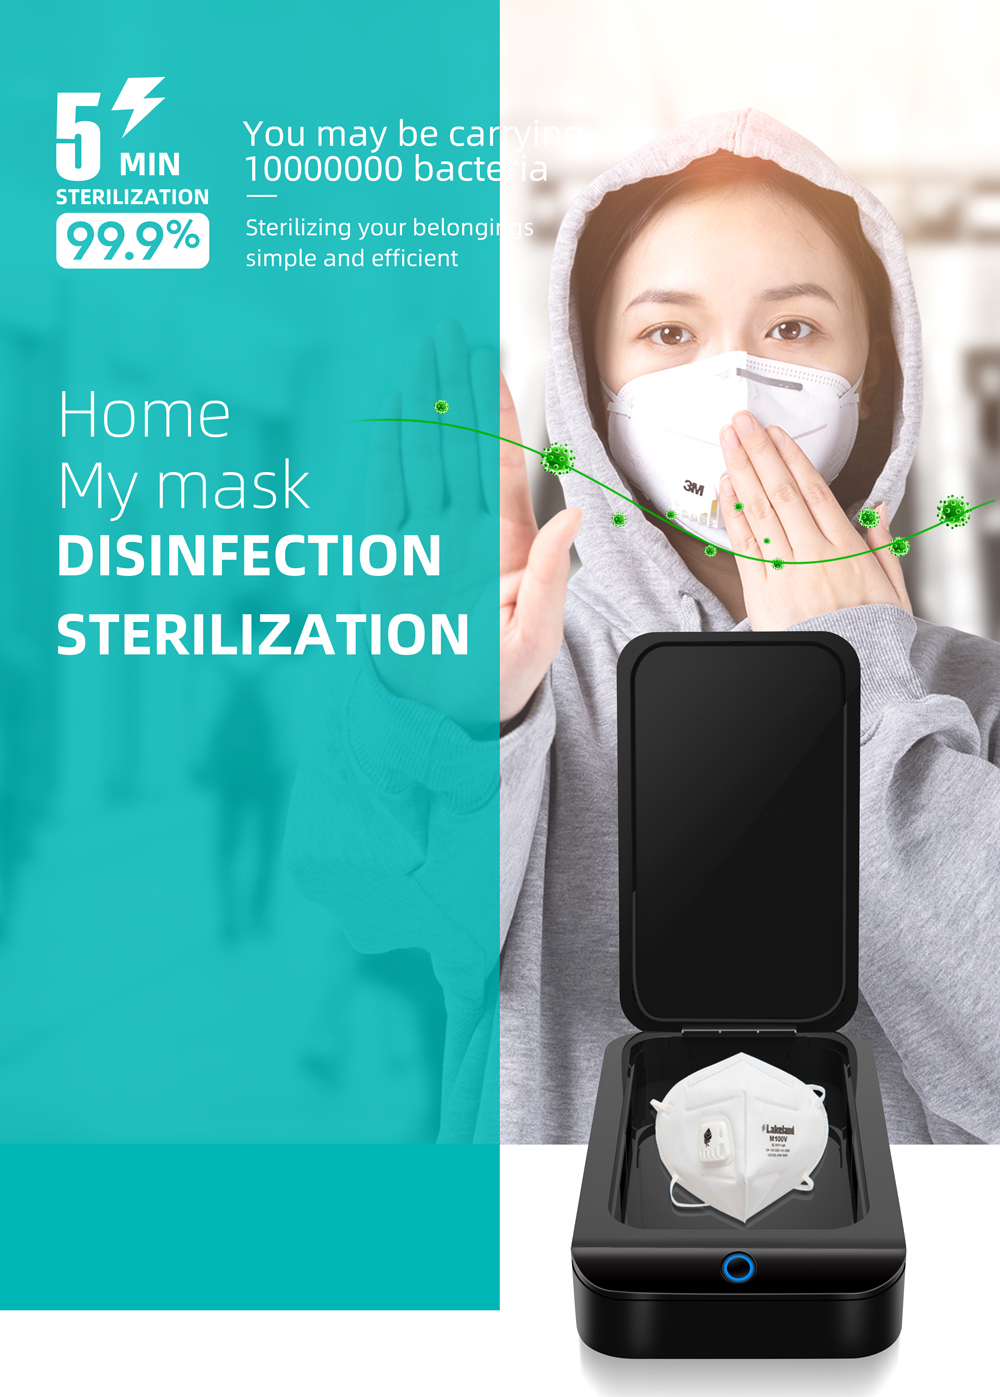 X2-Mask-Sterilizer-Box-UV-Ultraviolet-Disinfectant-Box-for-Mask-Phone-Remote-Toothbrush-1656256-1